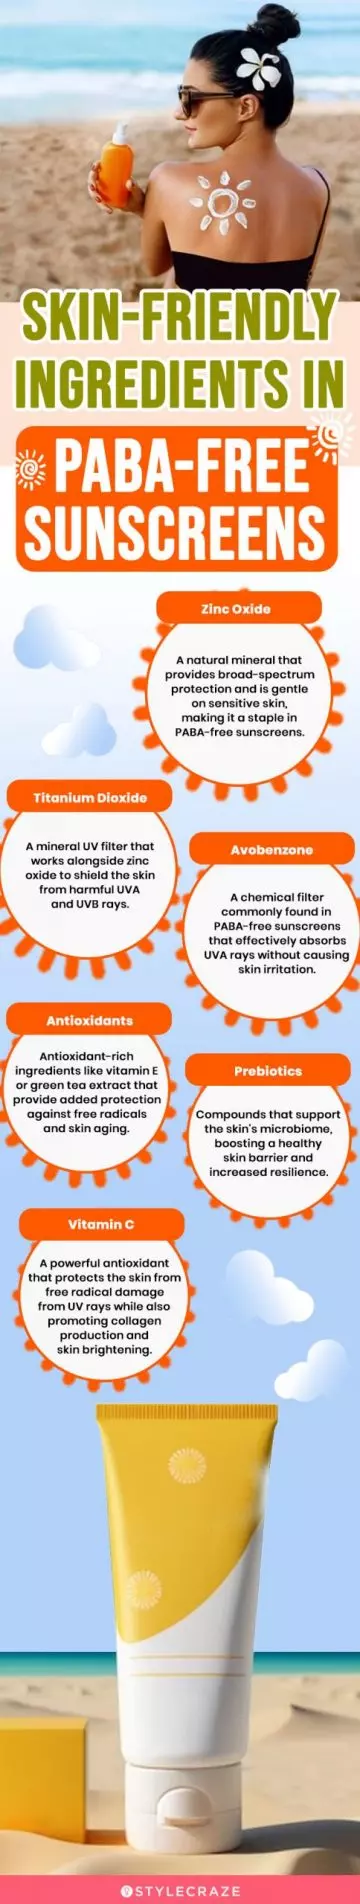 Skin-Friendly Ingredients In PABA-free Sunscreens (infographic)